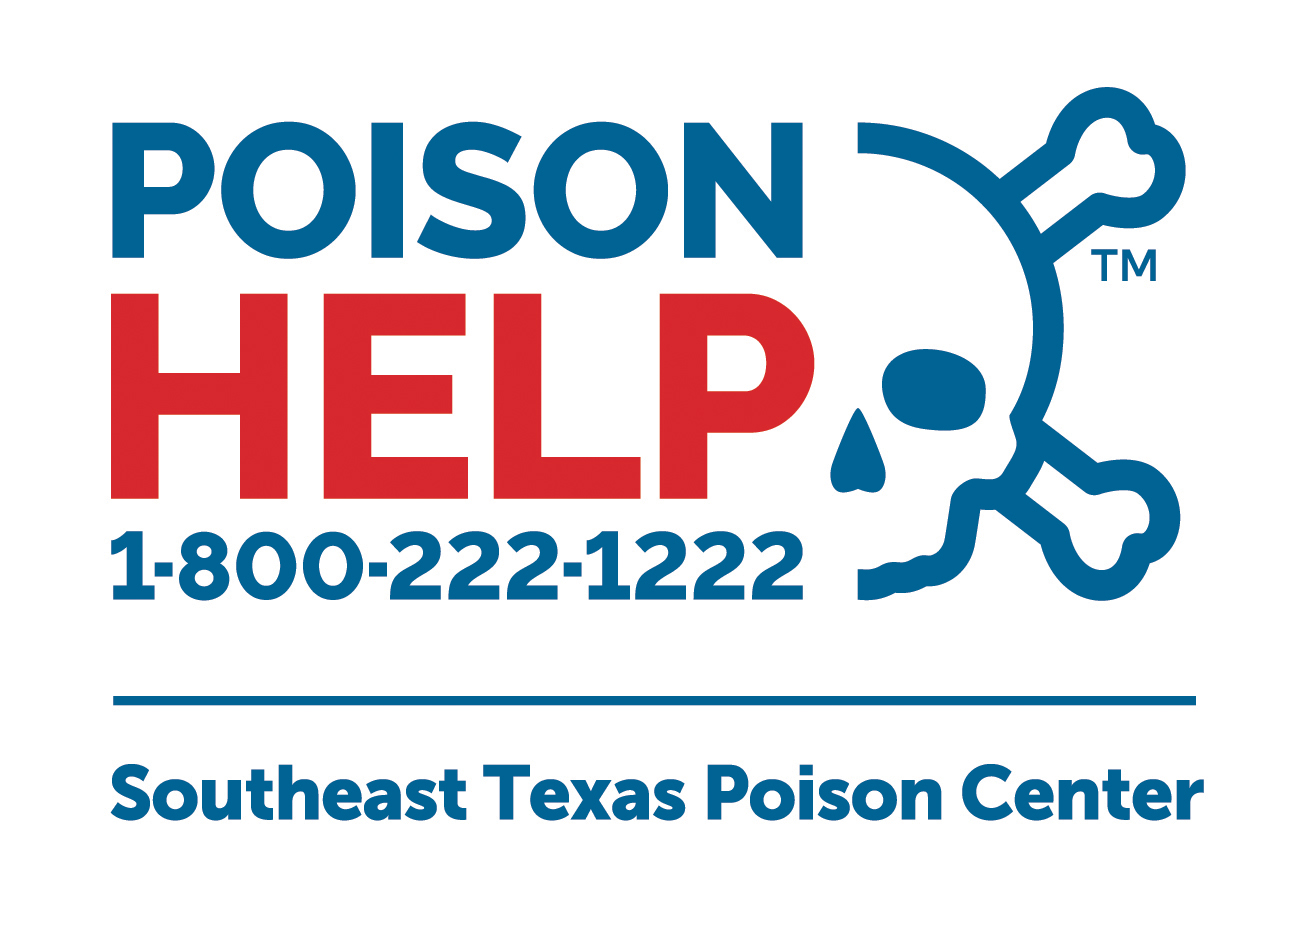 The number for the Poison Center is 1-800-222-1222